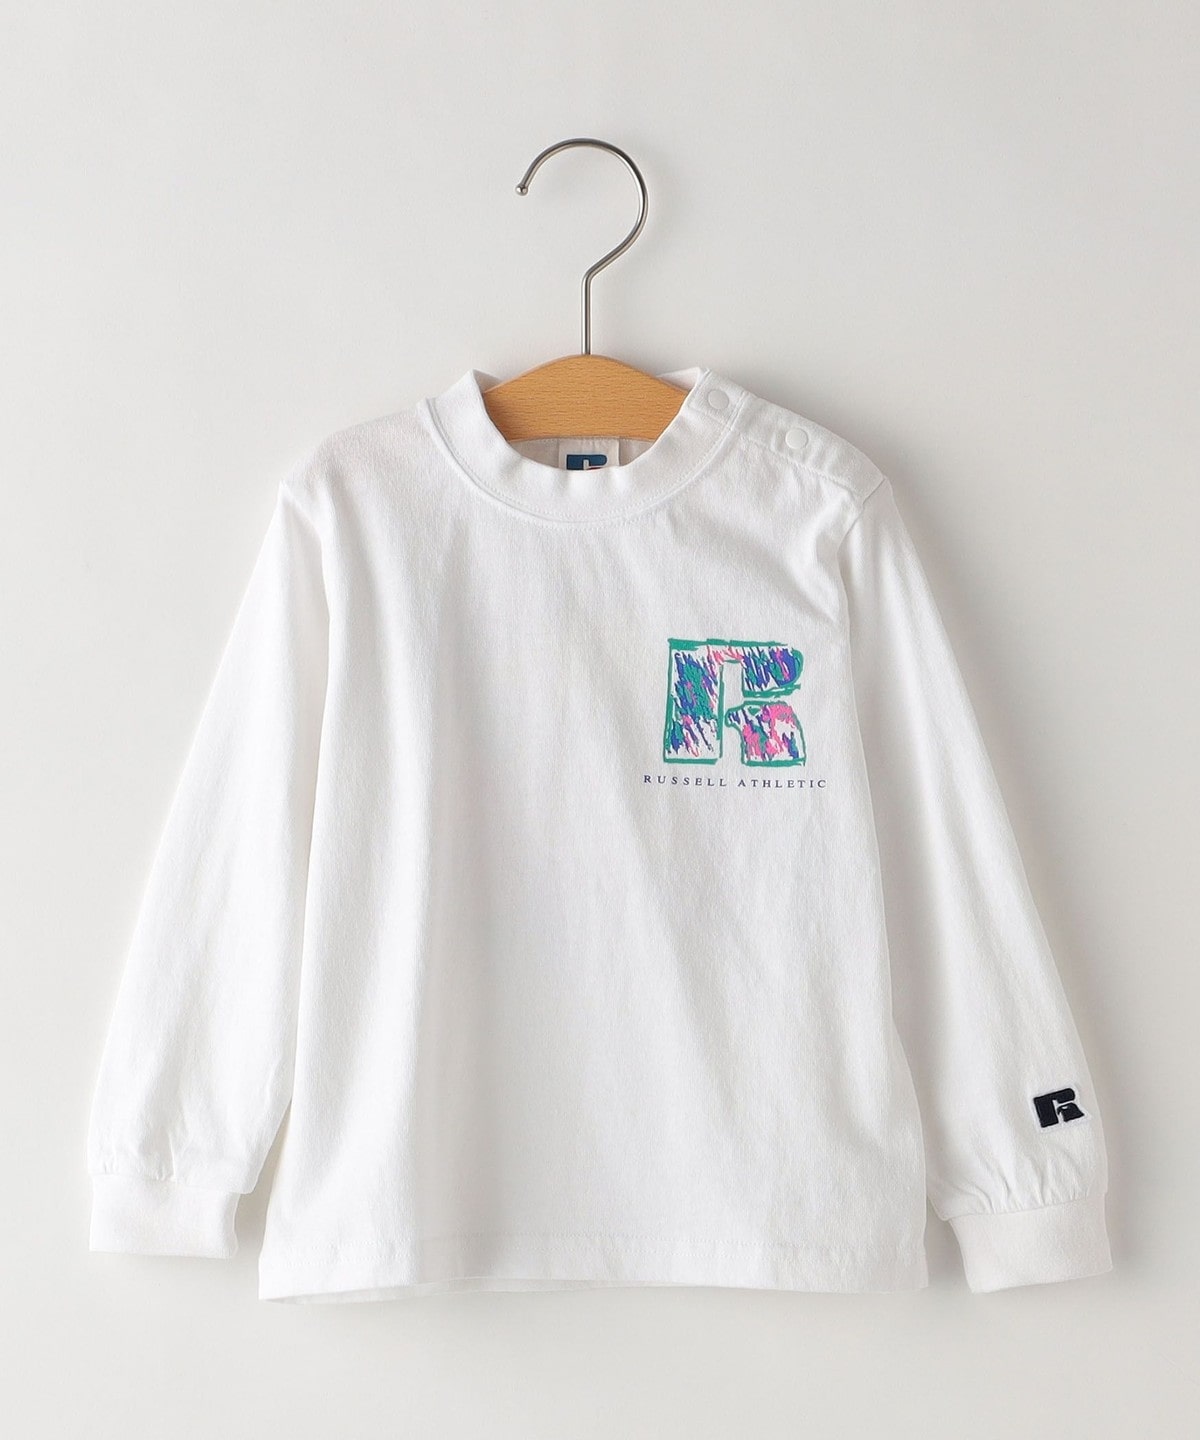 【SHIPS KIDS別注】RUSSELL ATHLETIC:90cm / カラーリング ロゴ 長袖 TEE ホワイト